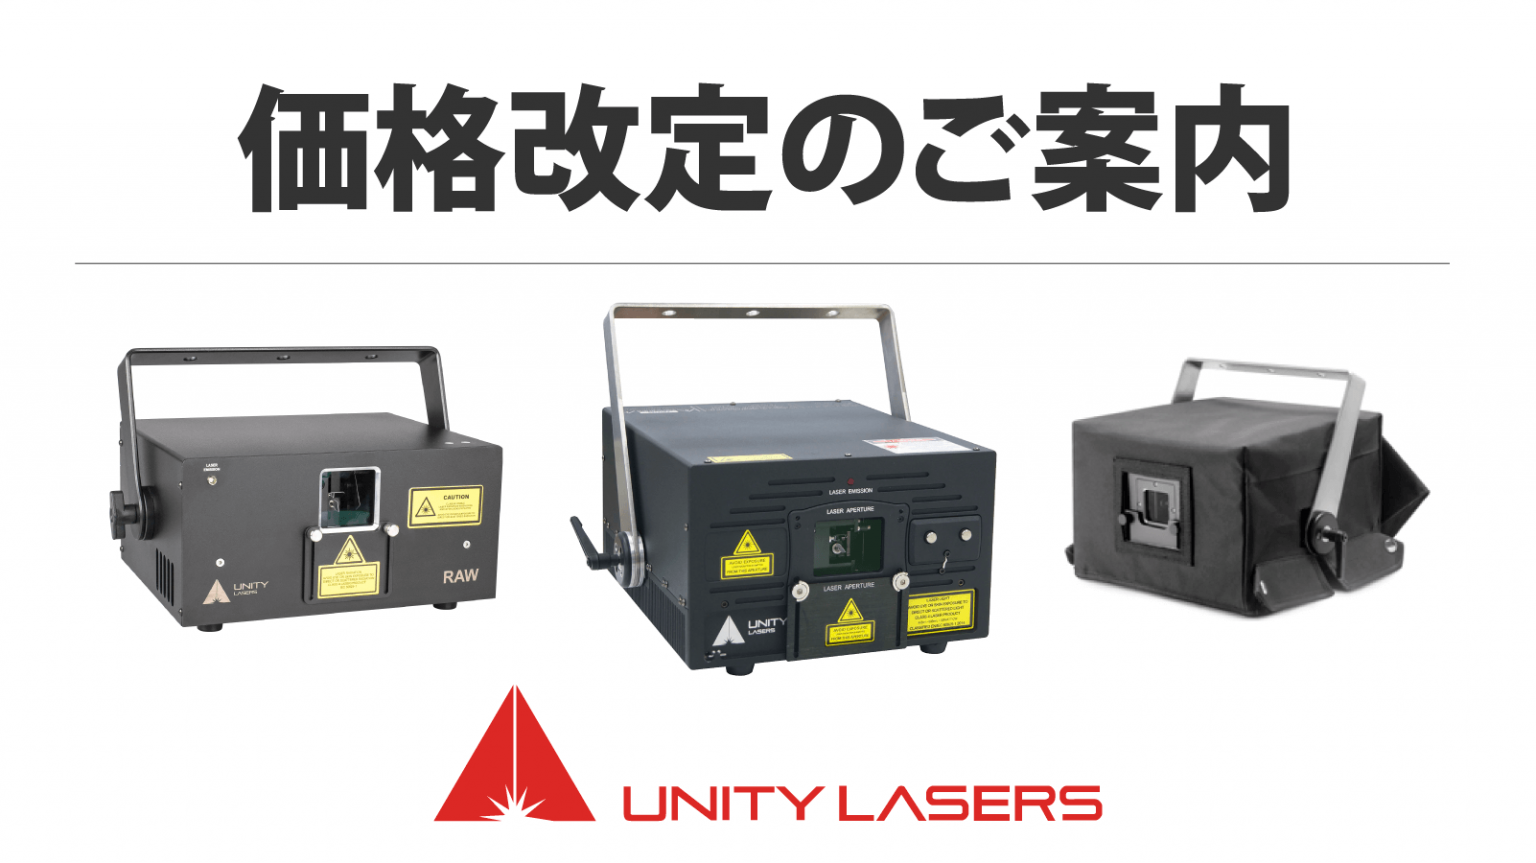 【UNITY LASERS】価格改定のご案内